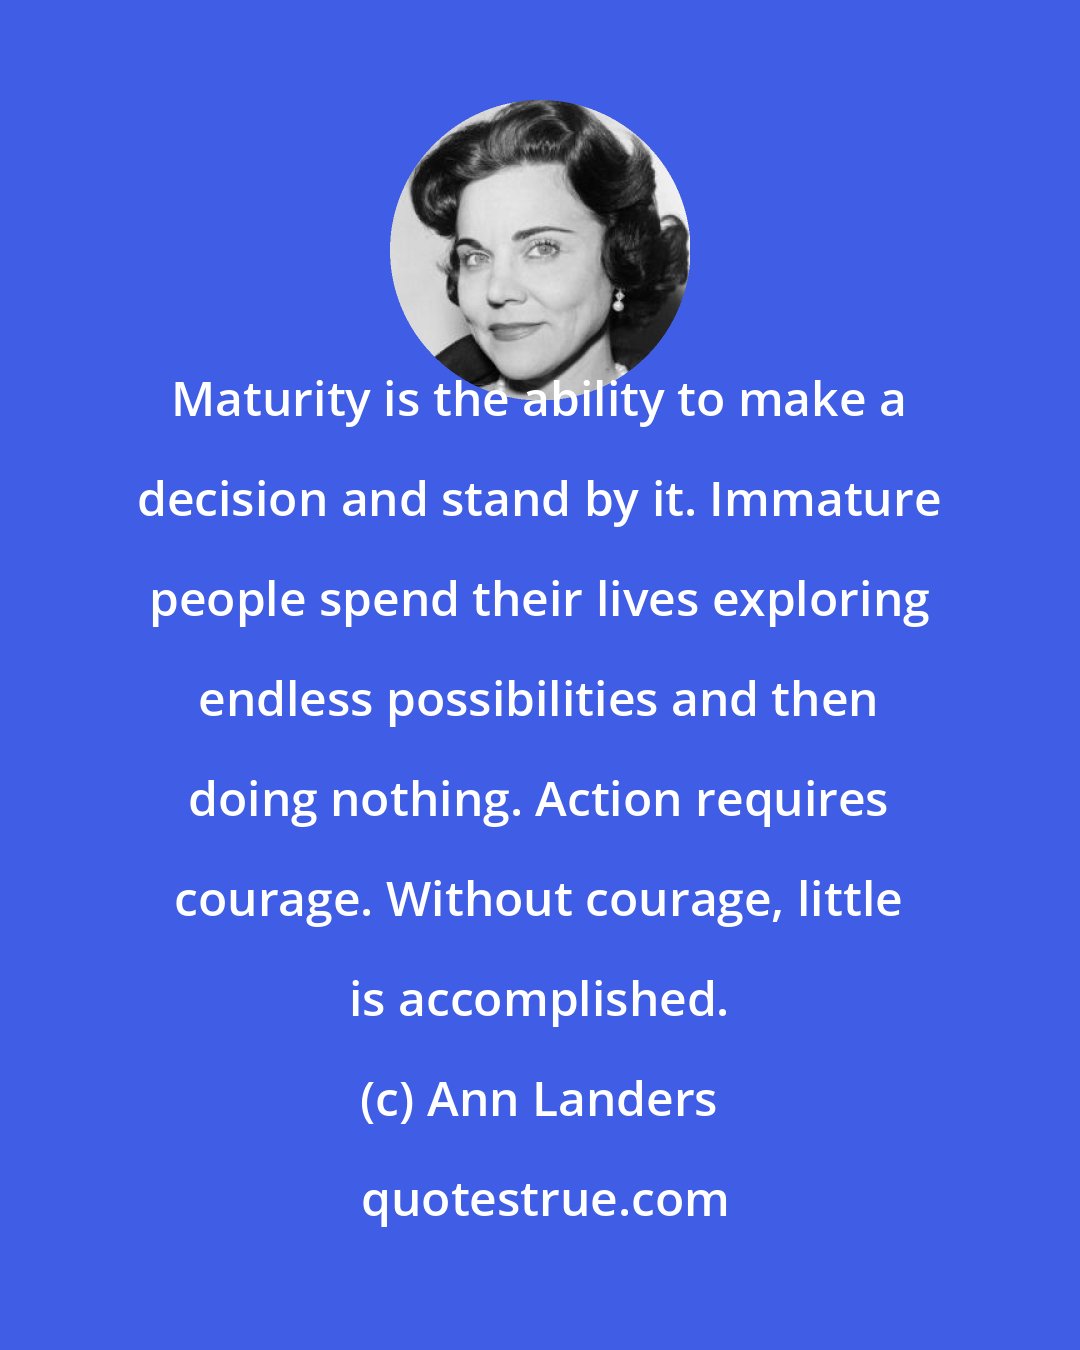 Ann Landers: Maturity is the ability to make a decision and stand by it. Immature people spend their lives exploring endless possibilities and then doing nothing. Action requires courage. Without courage, little is accomplished.